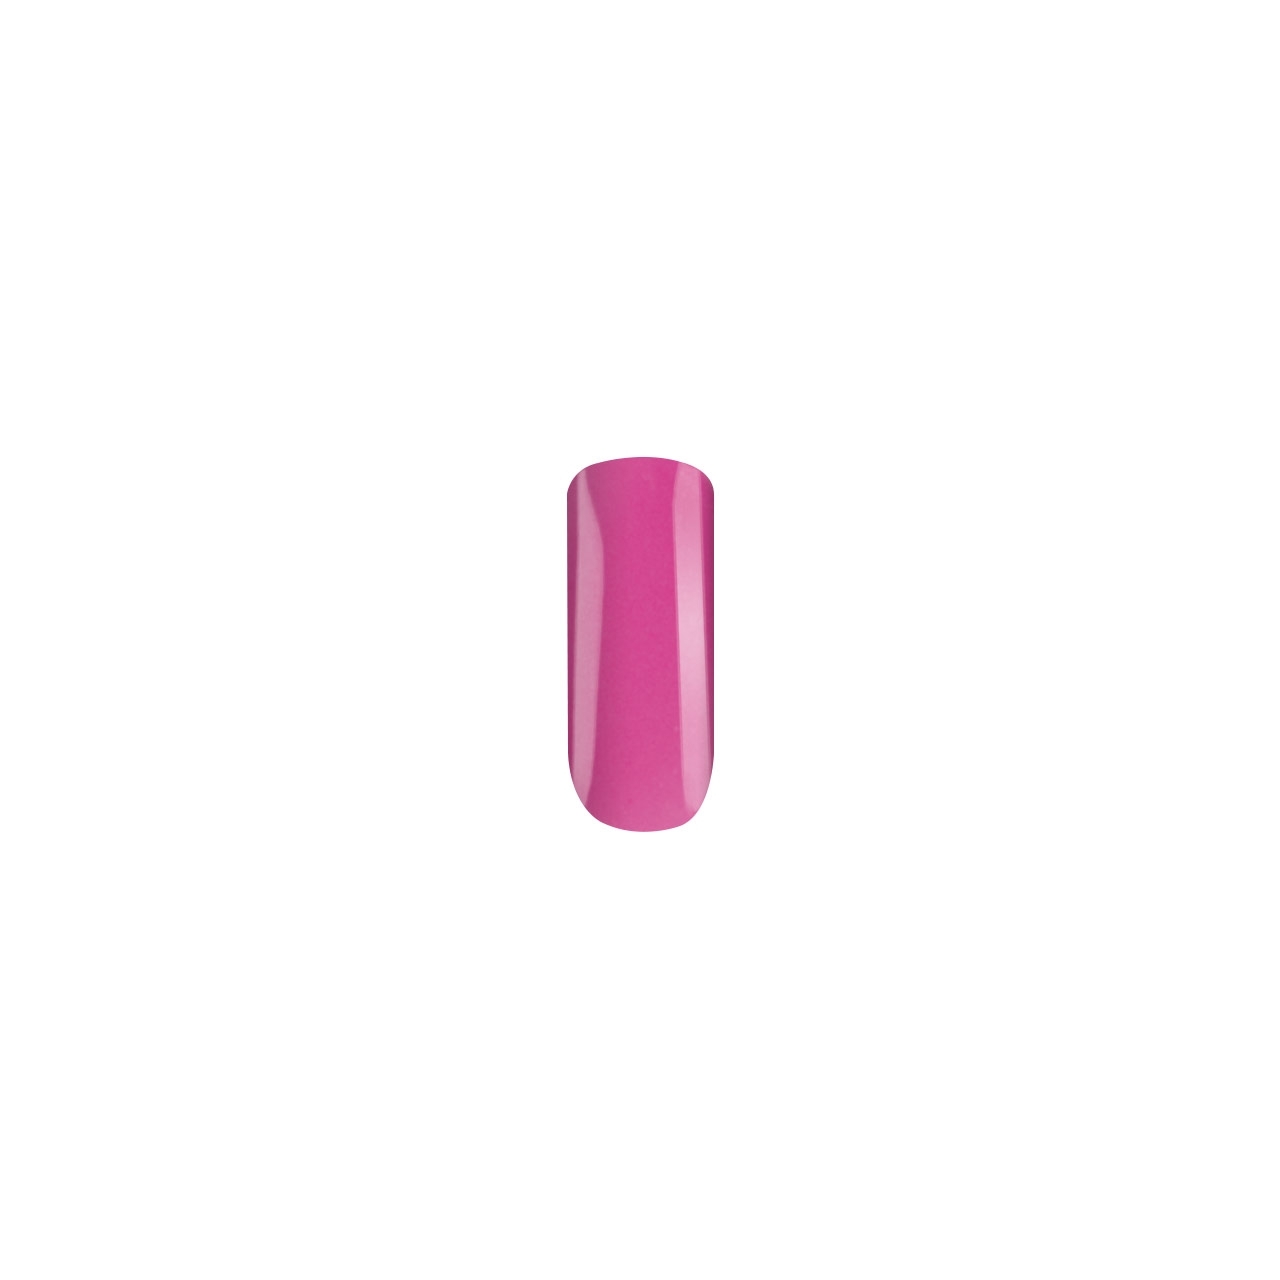 BAEHR BEAUTY CONCEPT - NAILS Nagellack rose soft pastell 11 ml